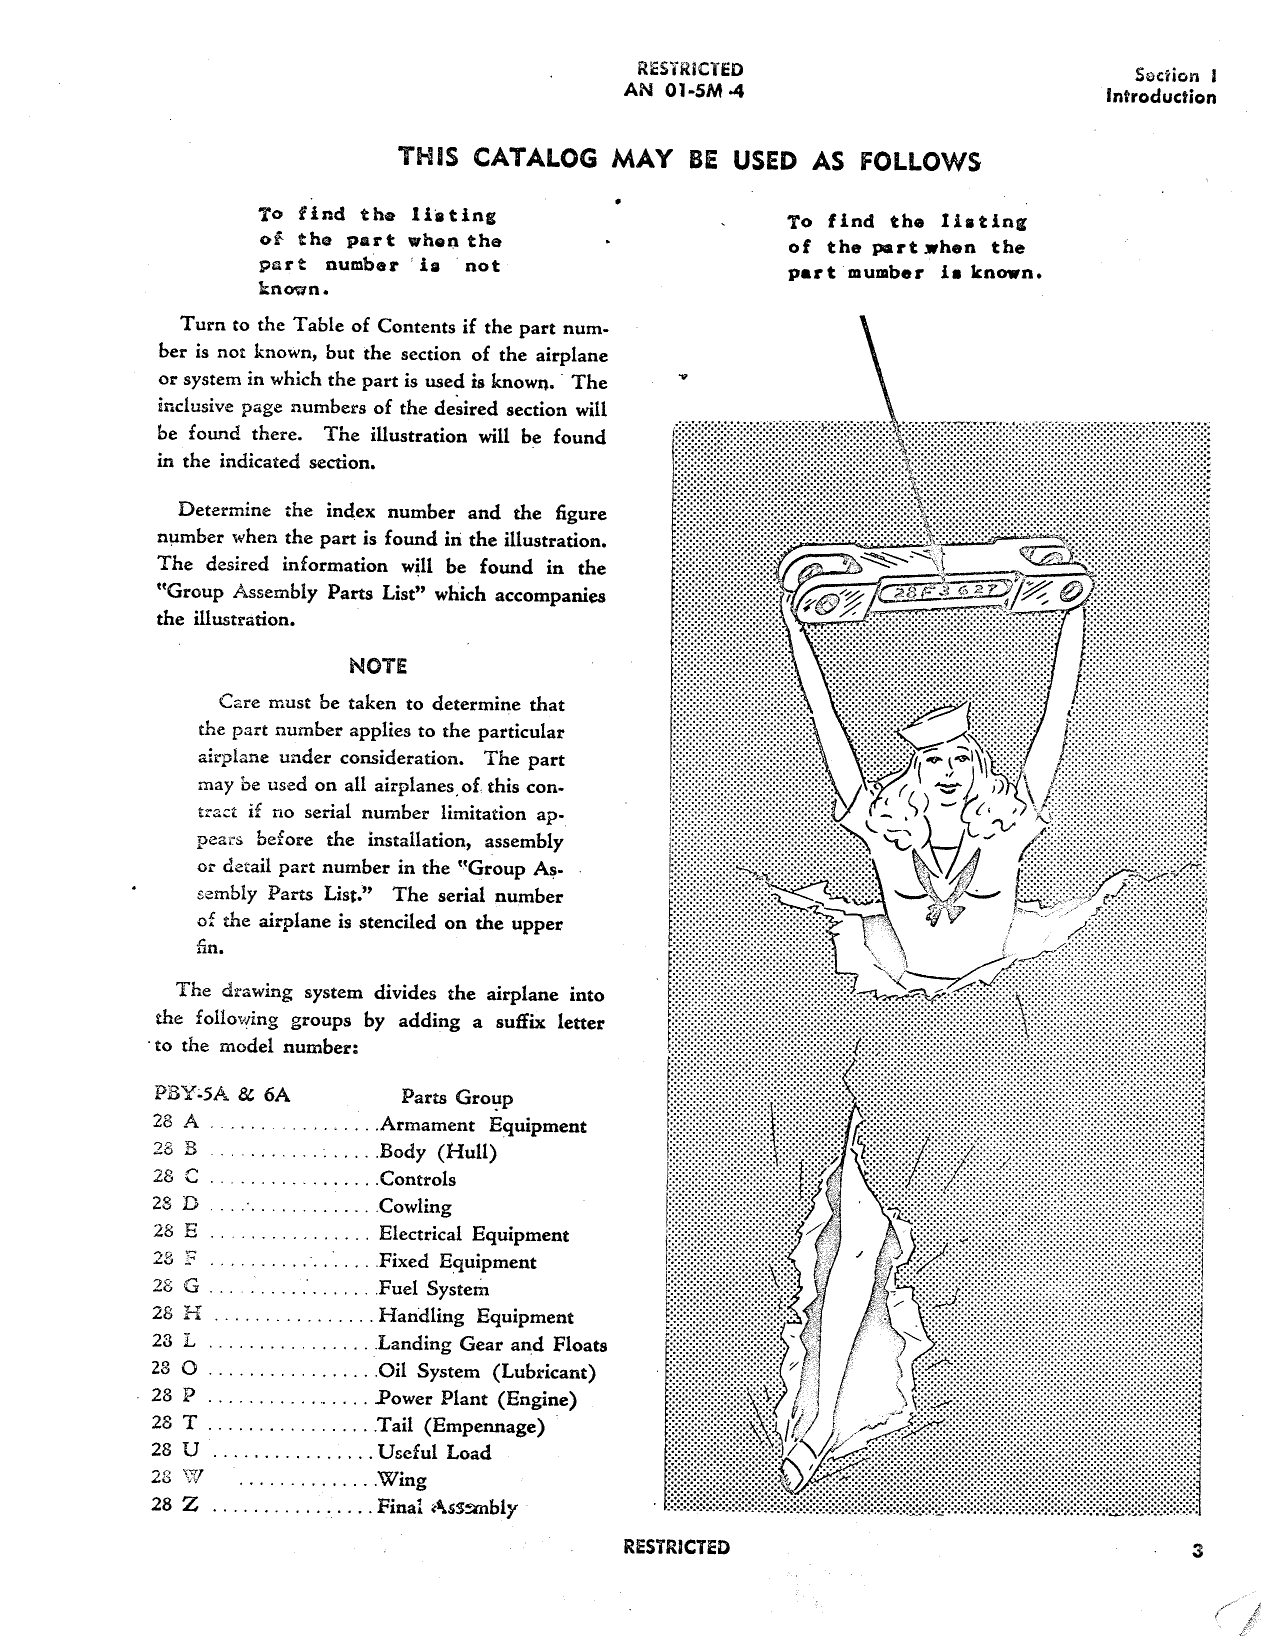 Sample page 7 from AirCorps Library document: Parts Catalog for OA-10, PBY-5A, and PBY-6A